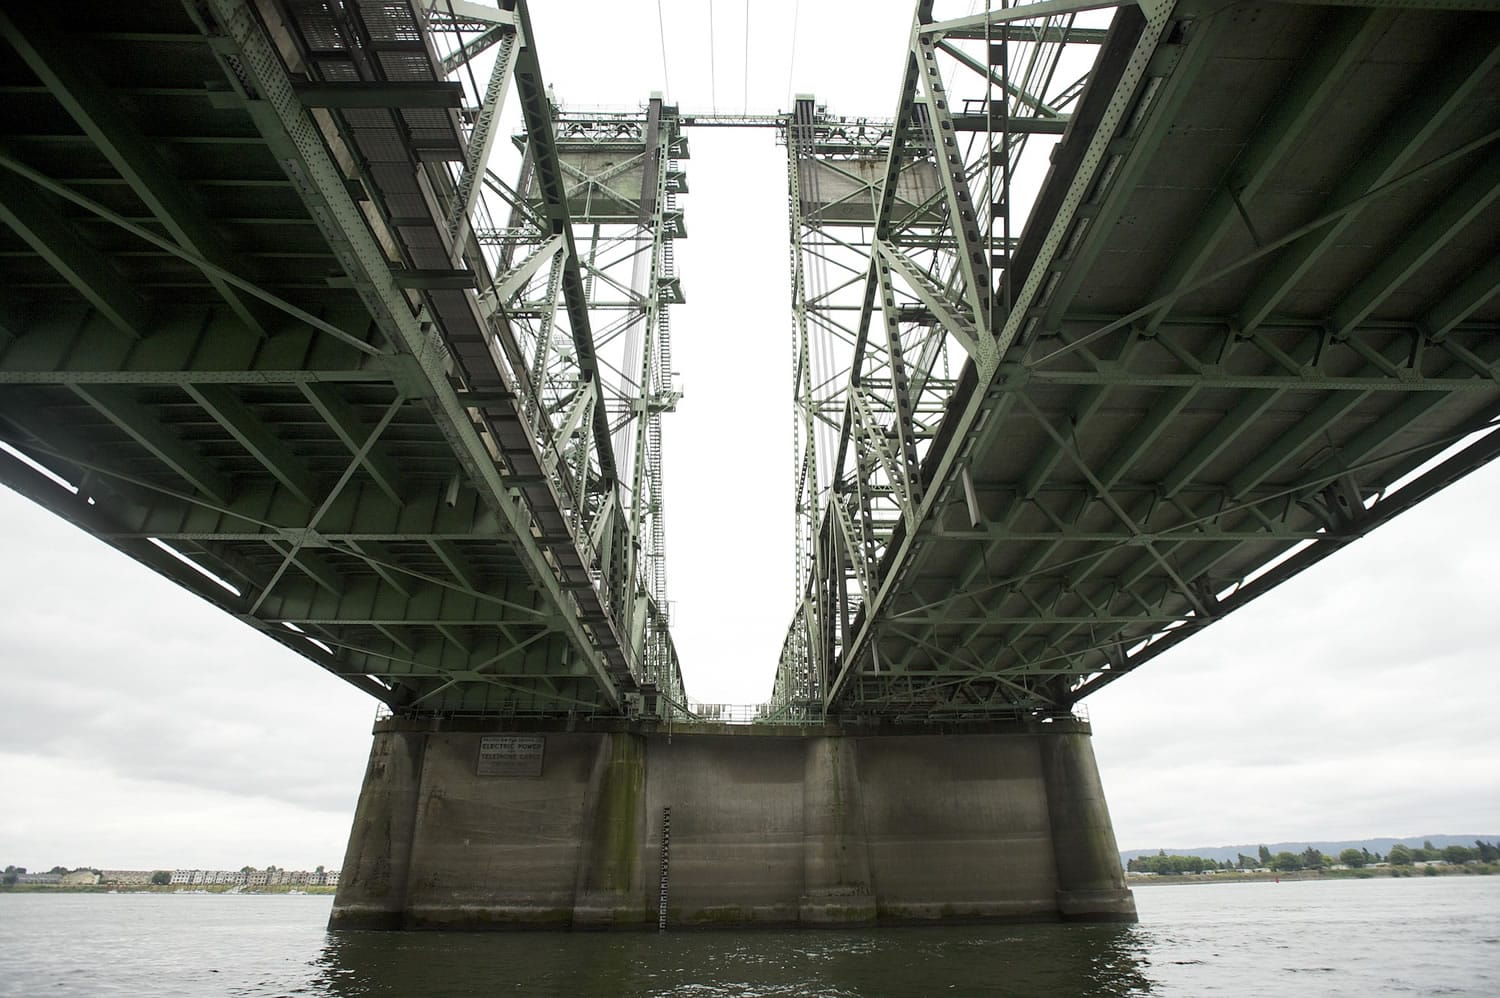 The current Interstate 5 Bridge, seen here looking toward the Oregon shore from under the lift span, is actually two bridges.